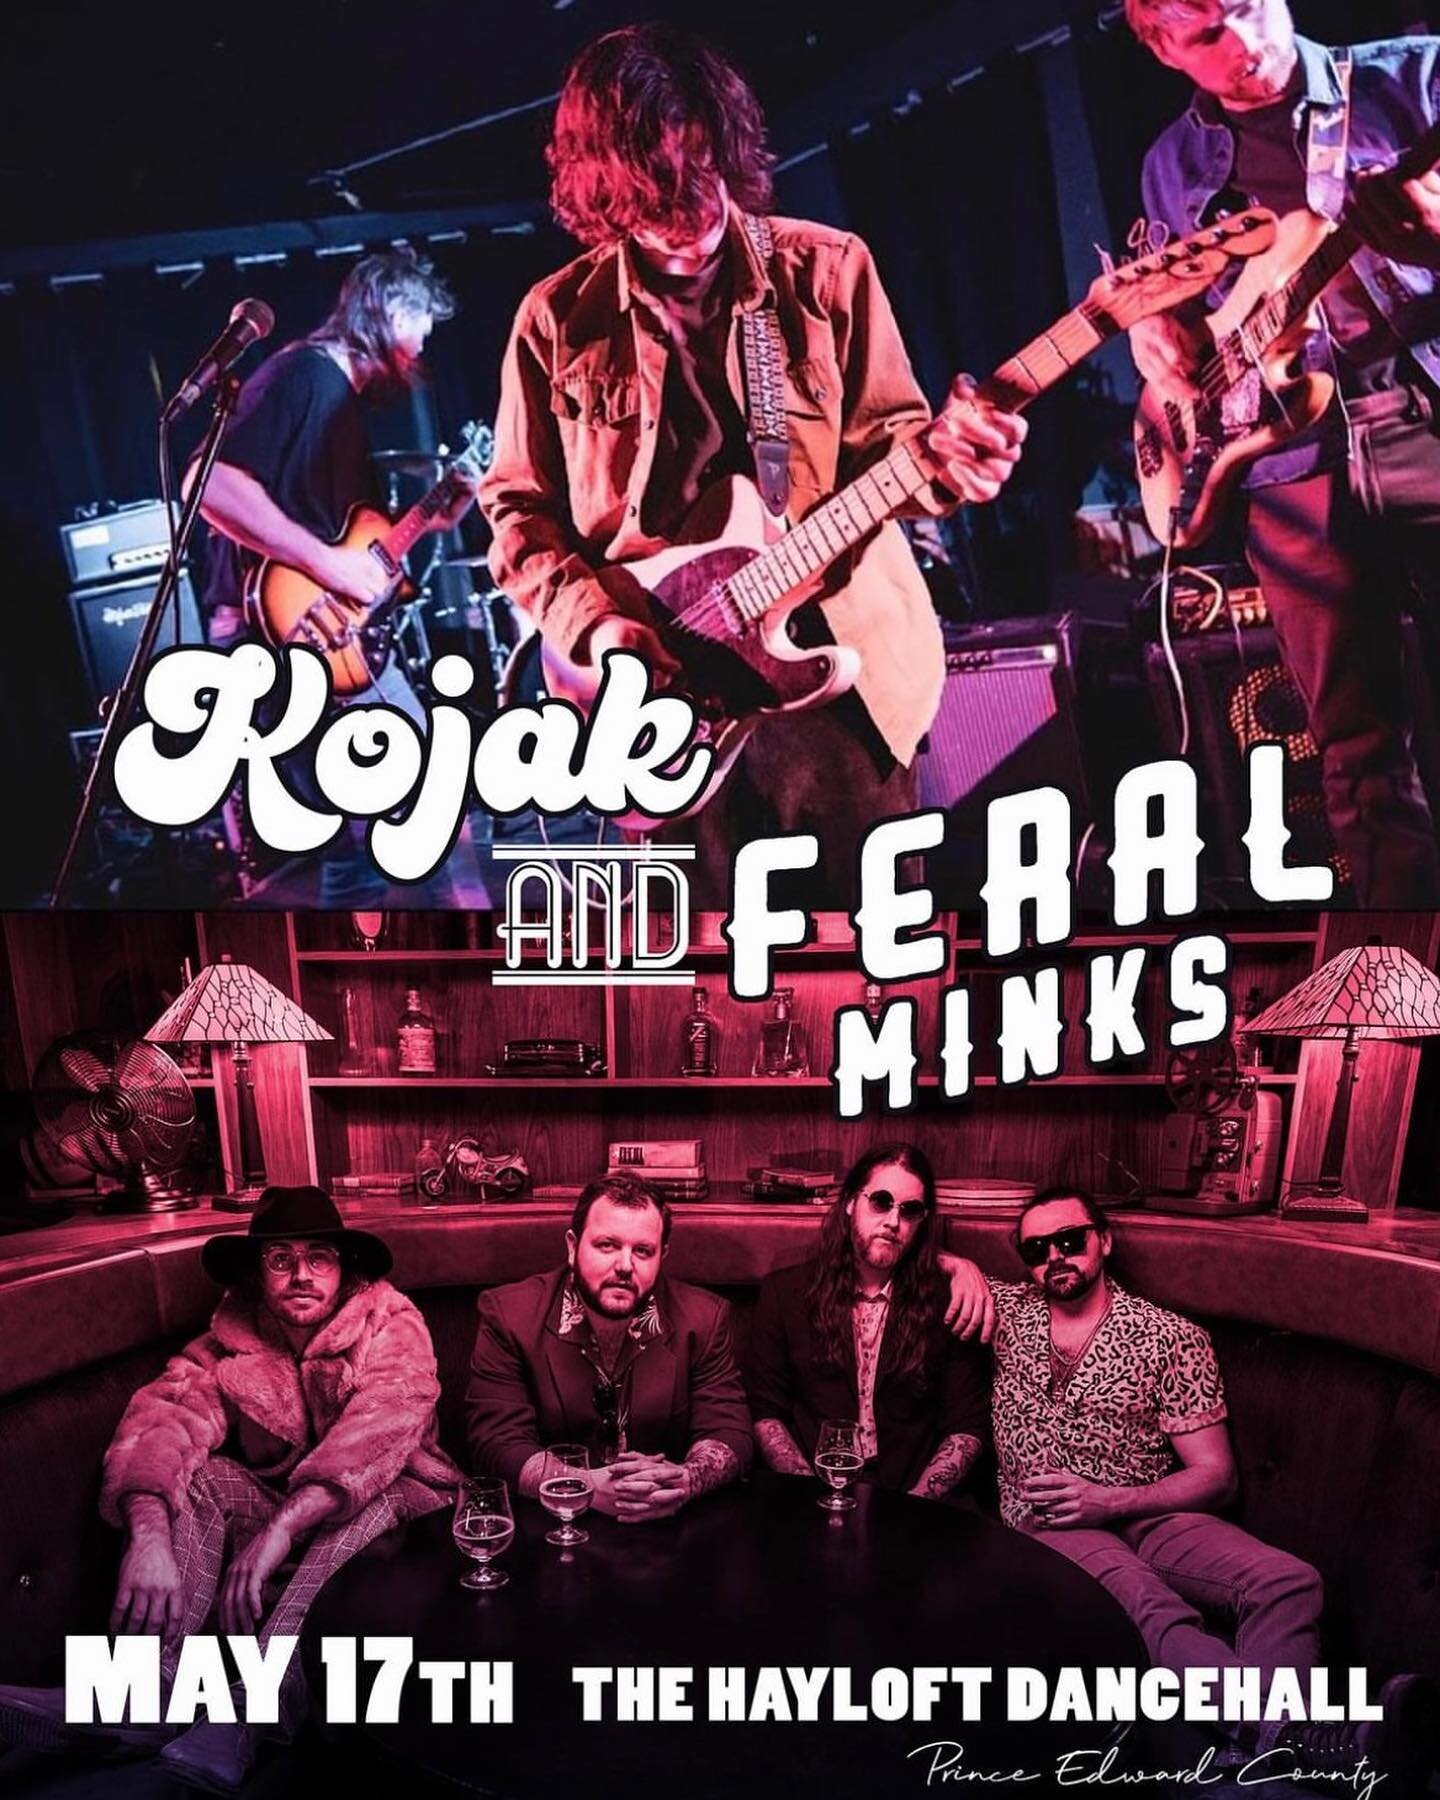 We are thrilled for round 3 @the_hayloft_dancehall May 17th with our dear friends @feralminks! Grab your tickets now and start your May long weekend off with a party! #live #music #rocknroll